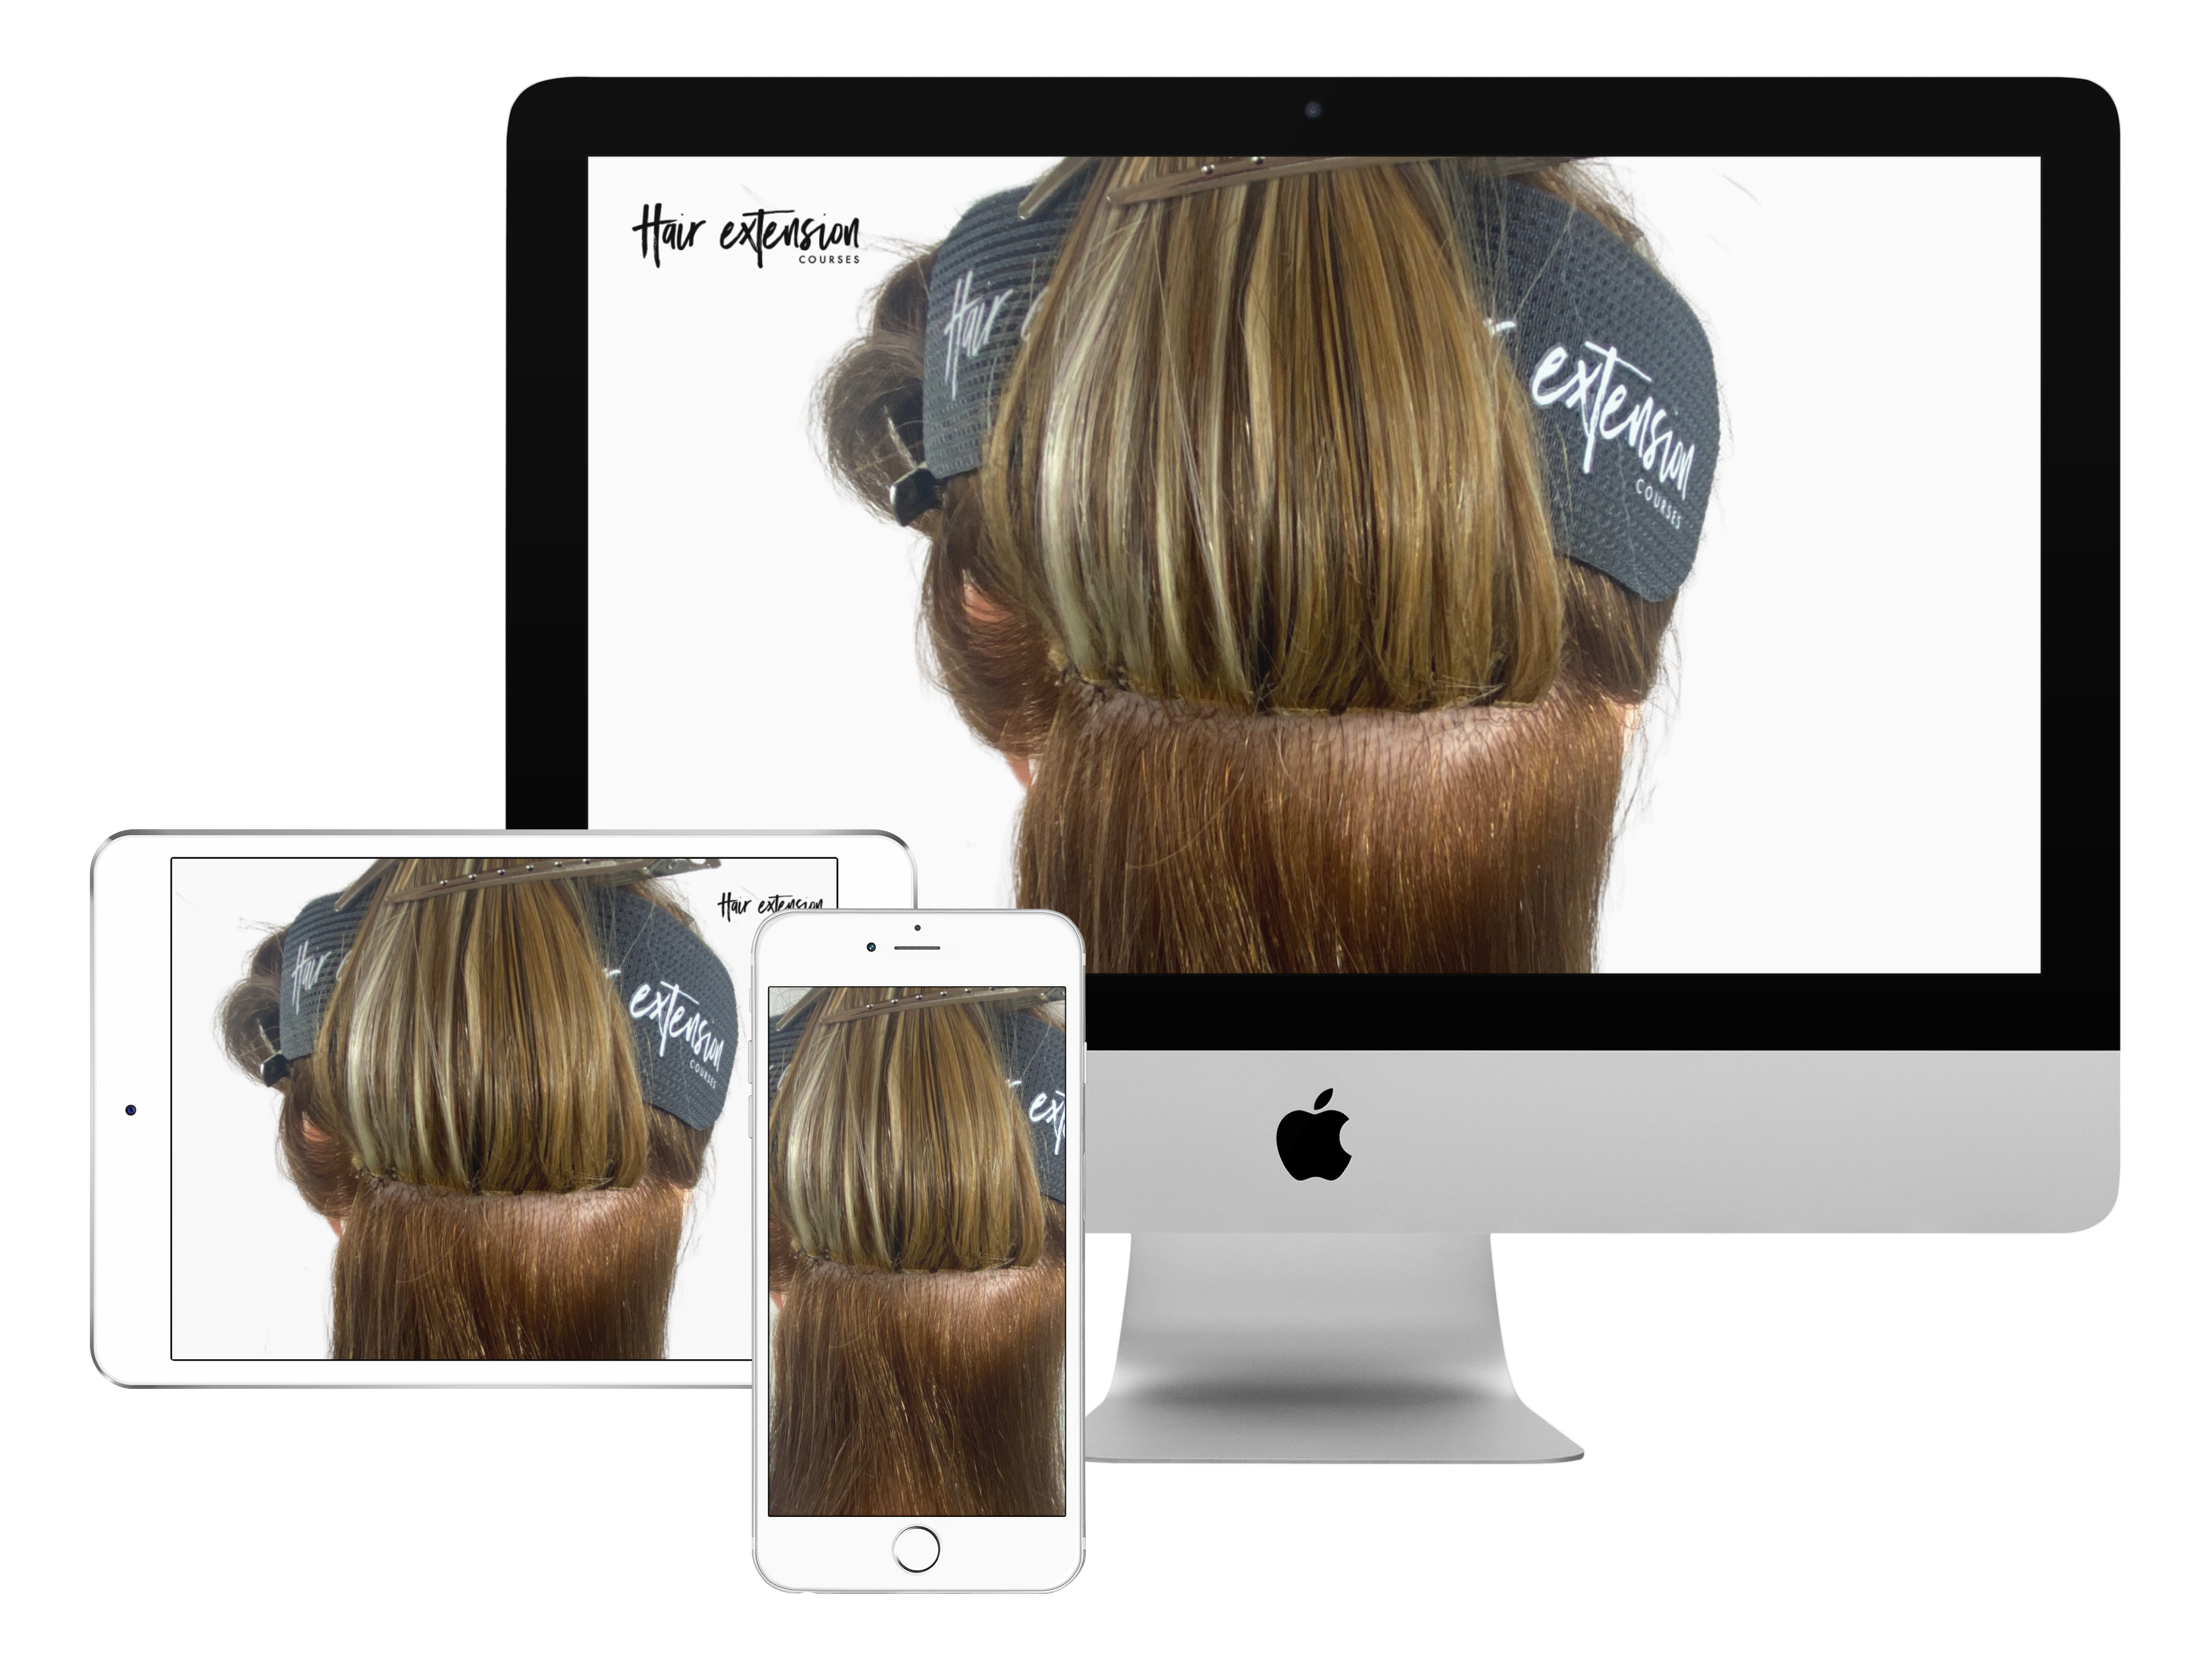 the hidden weave hair extensions course | with training head | hair | tools